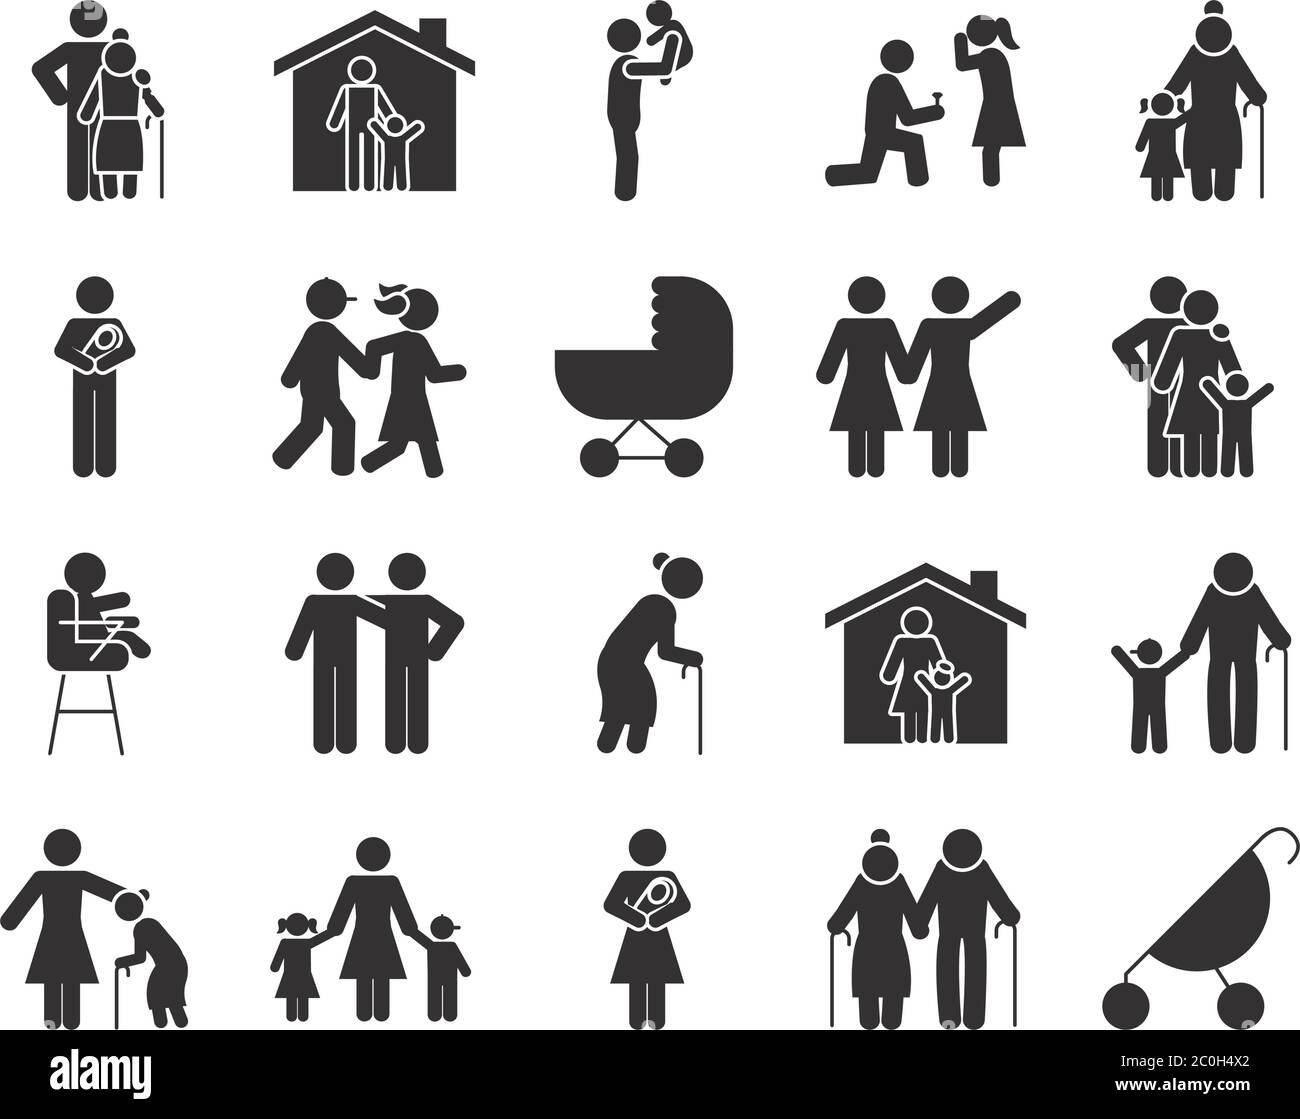 pictograms people